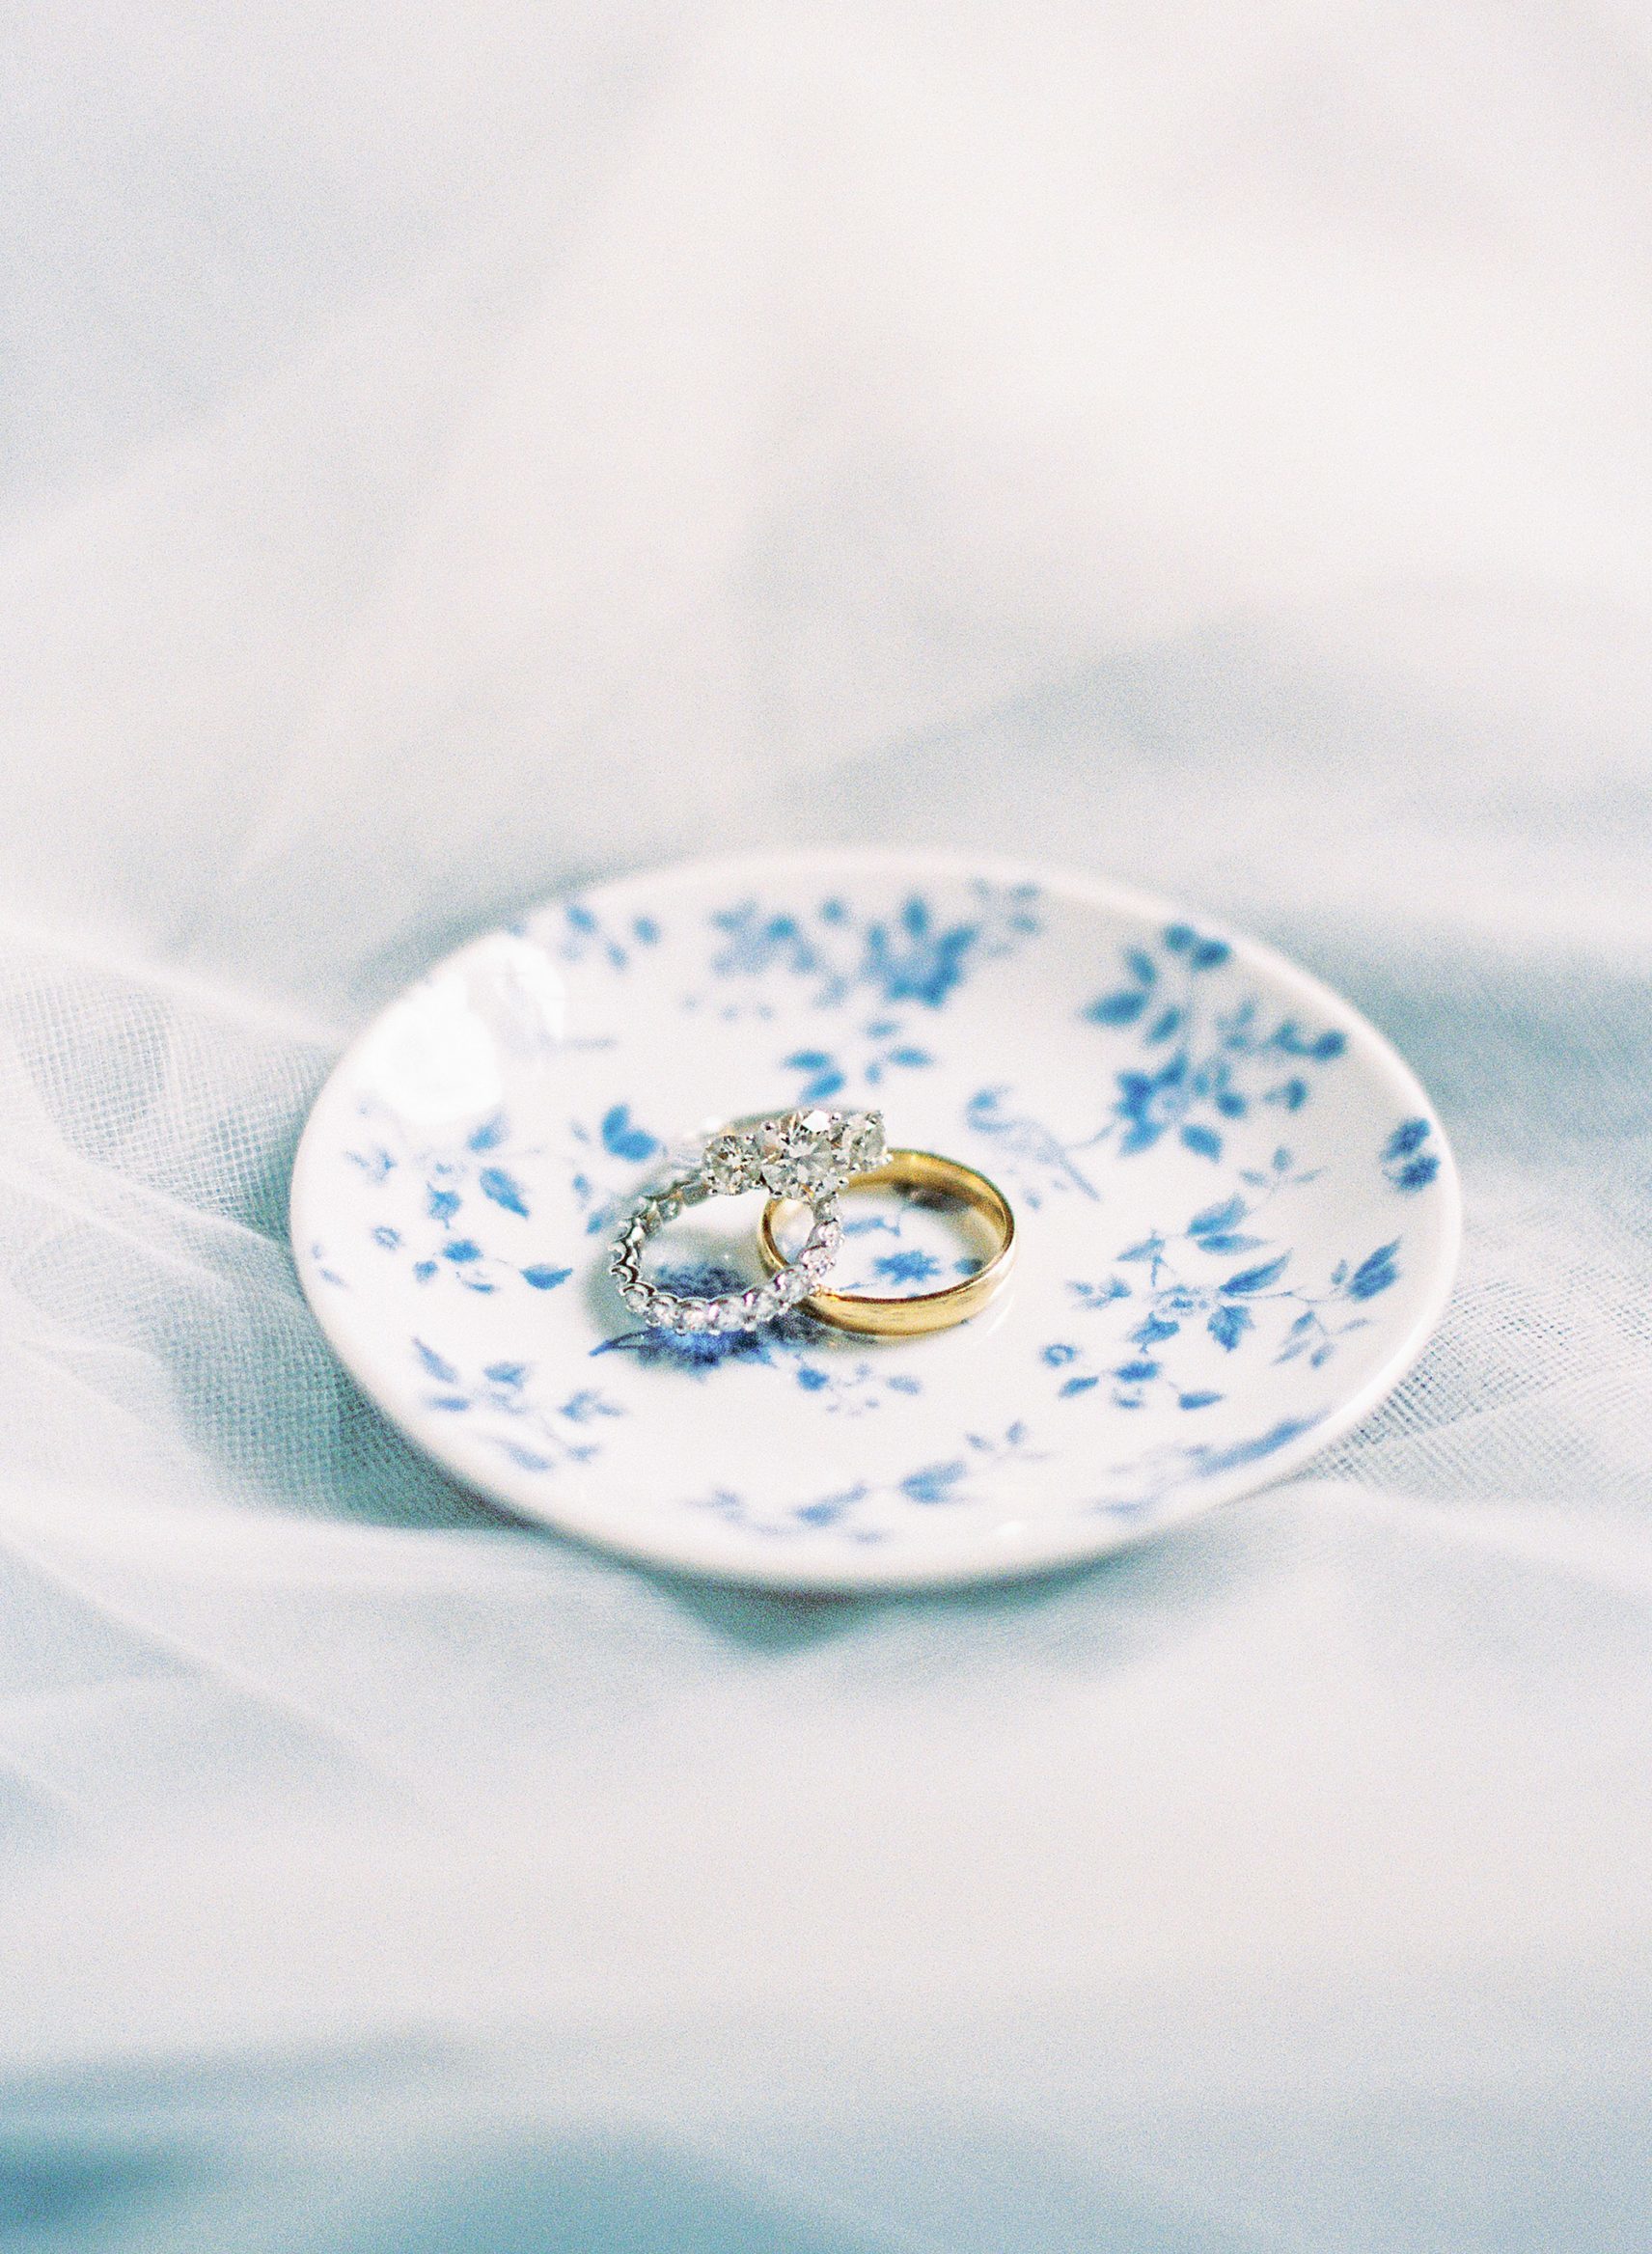 wedding bands and engagement ring styled on locust mat wedding flatlay